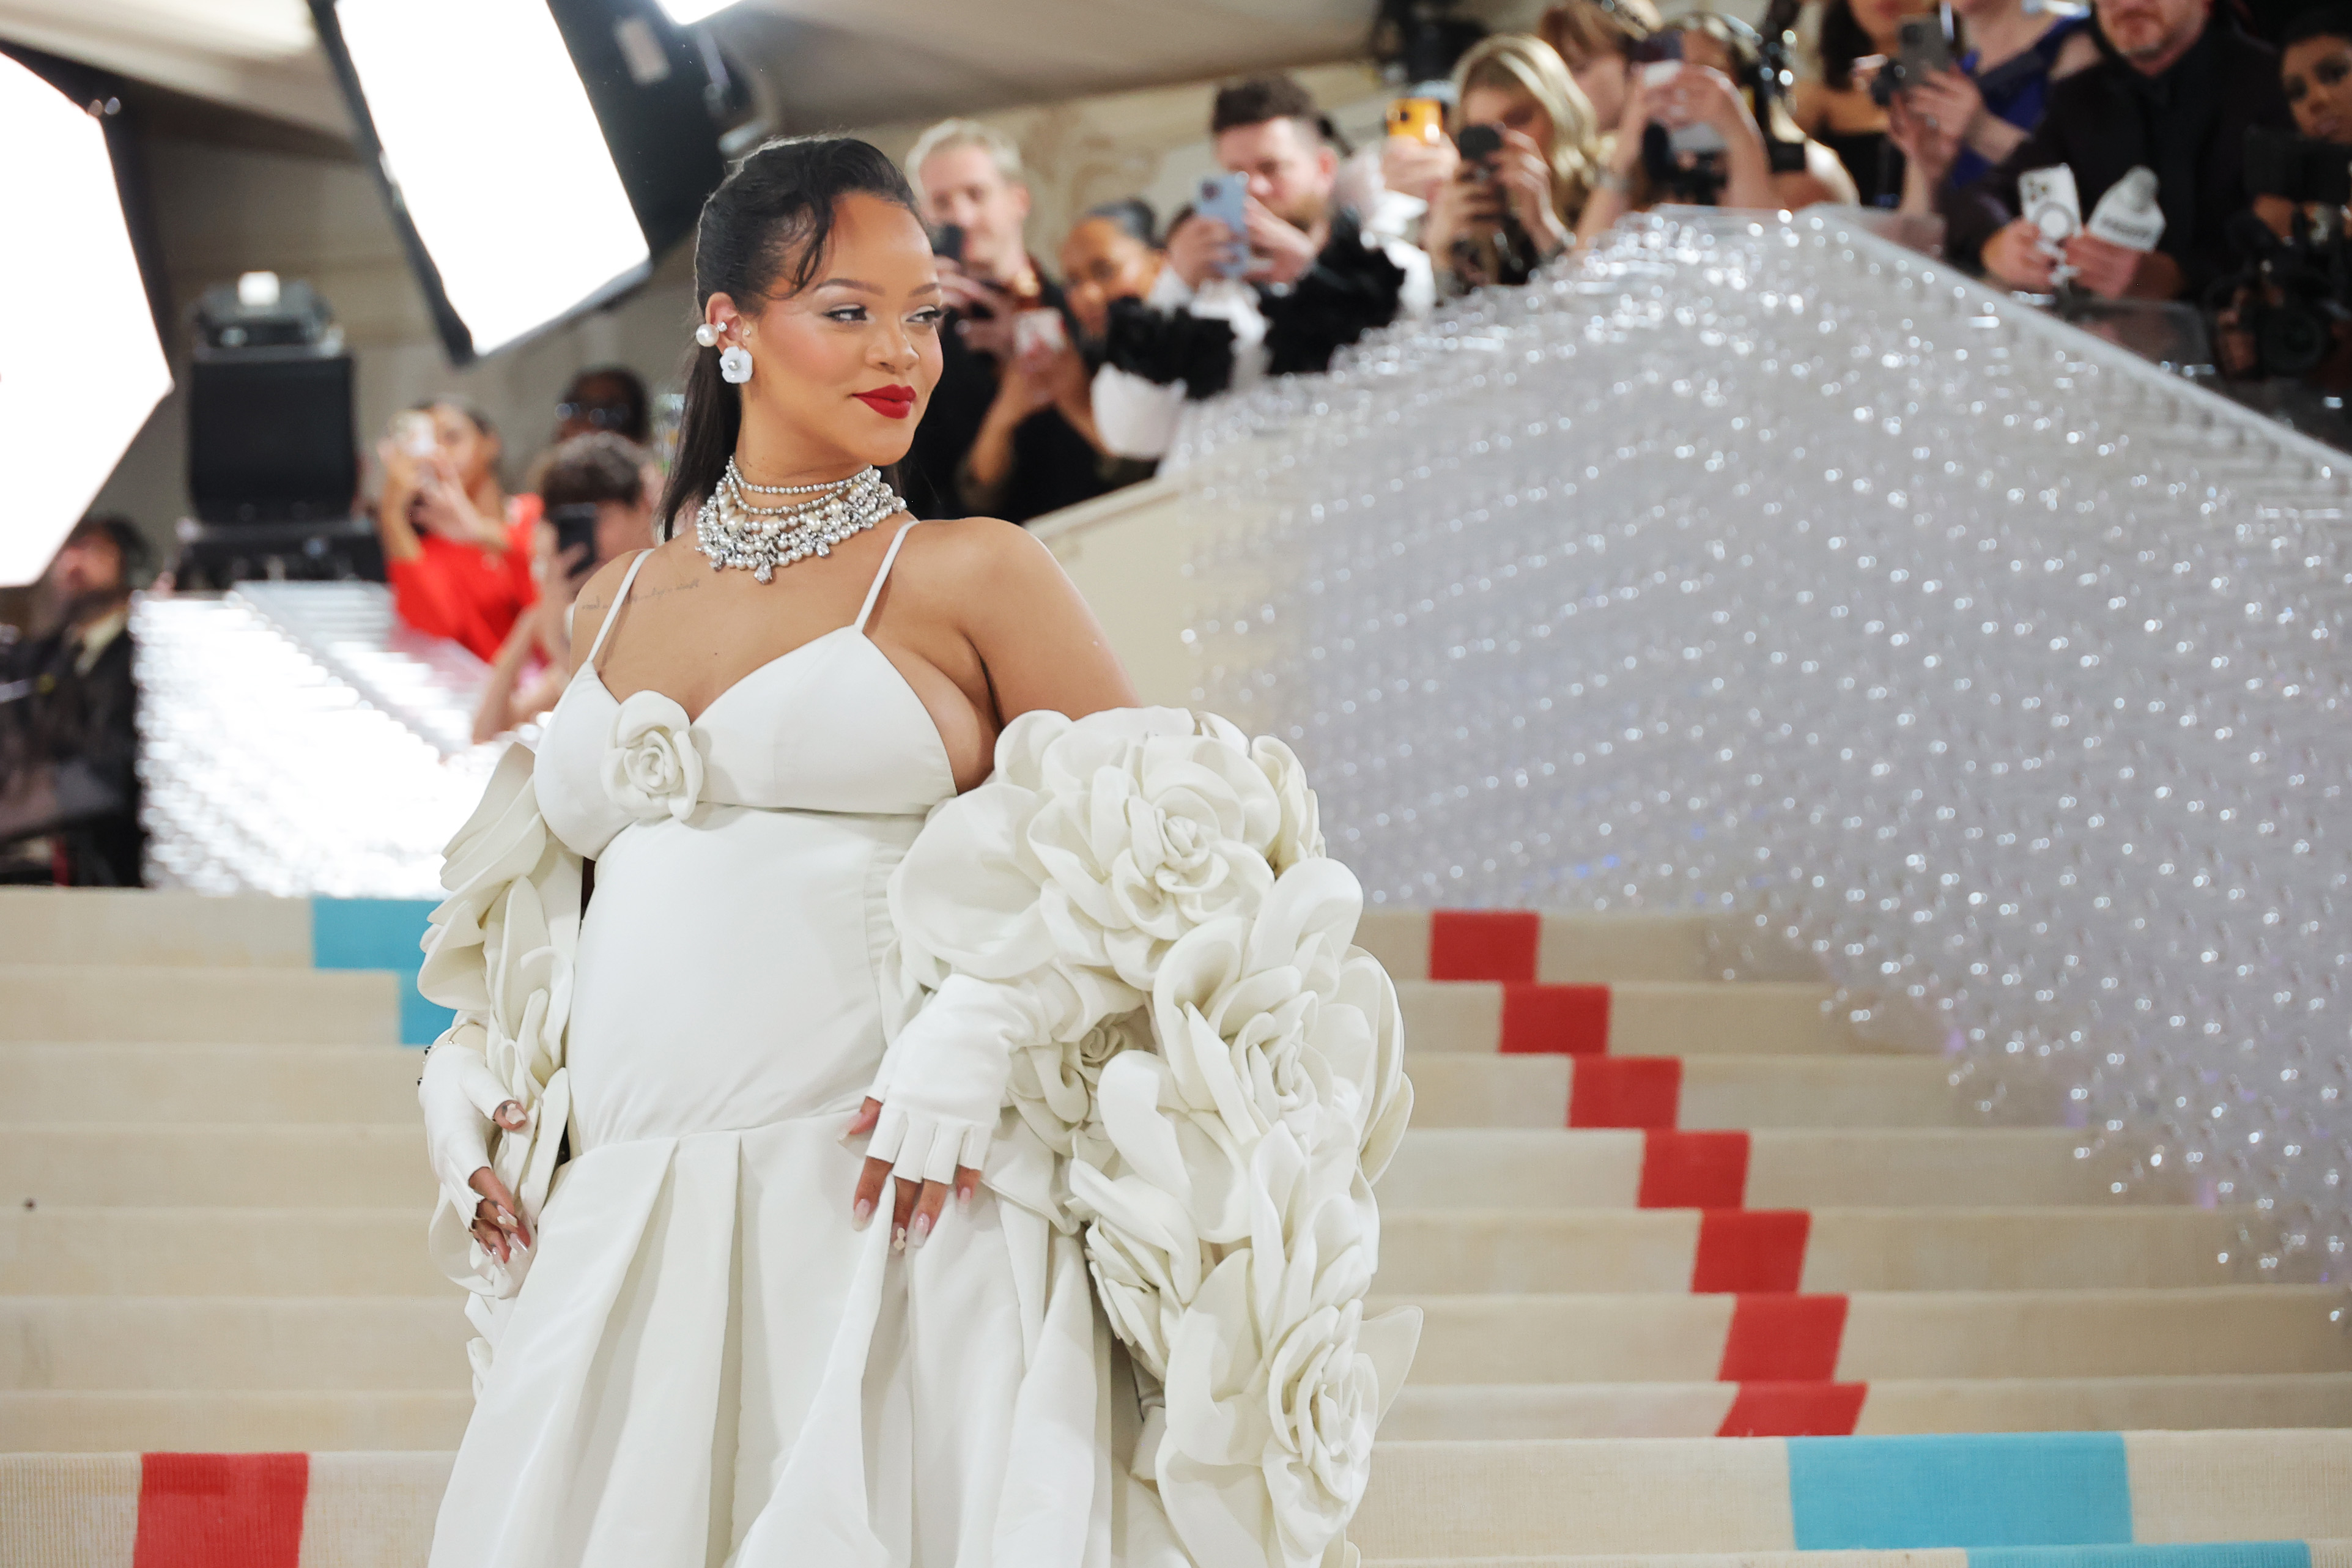 Rihanna in an elegant white gown with large ruffled detail, standing on red carpet steps, photographers in background